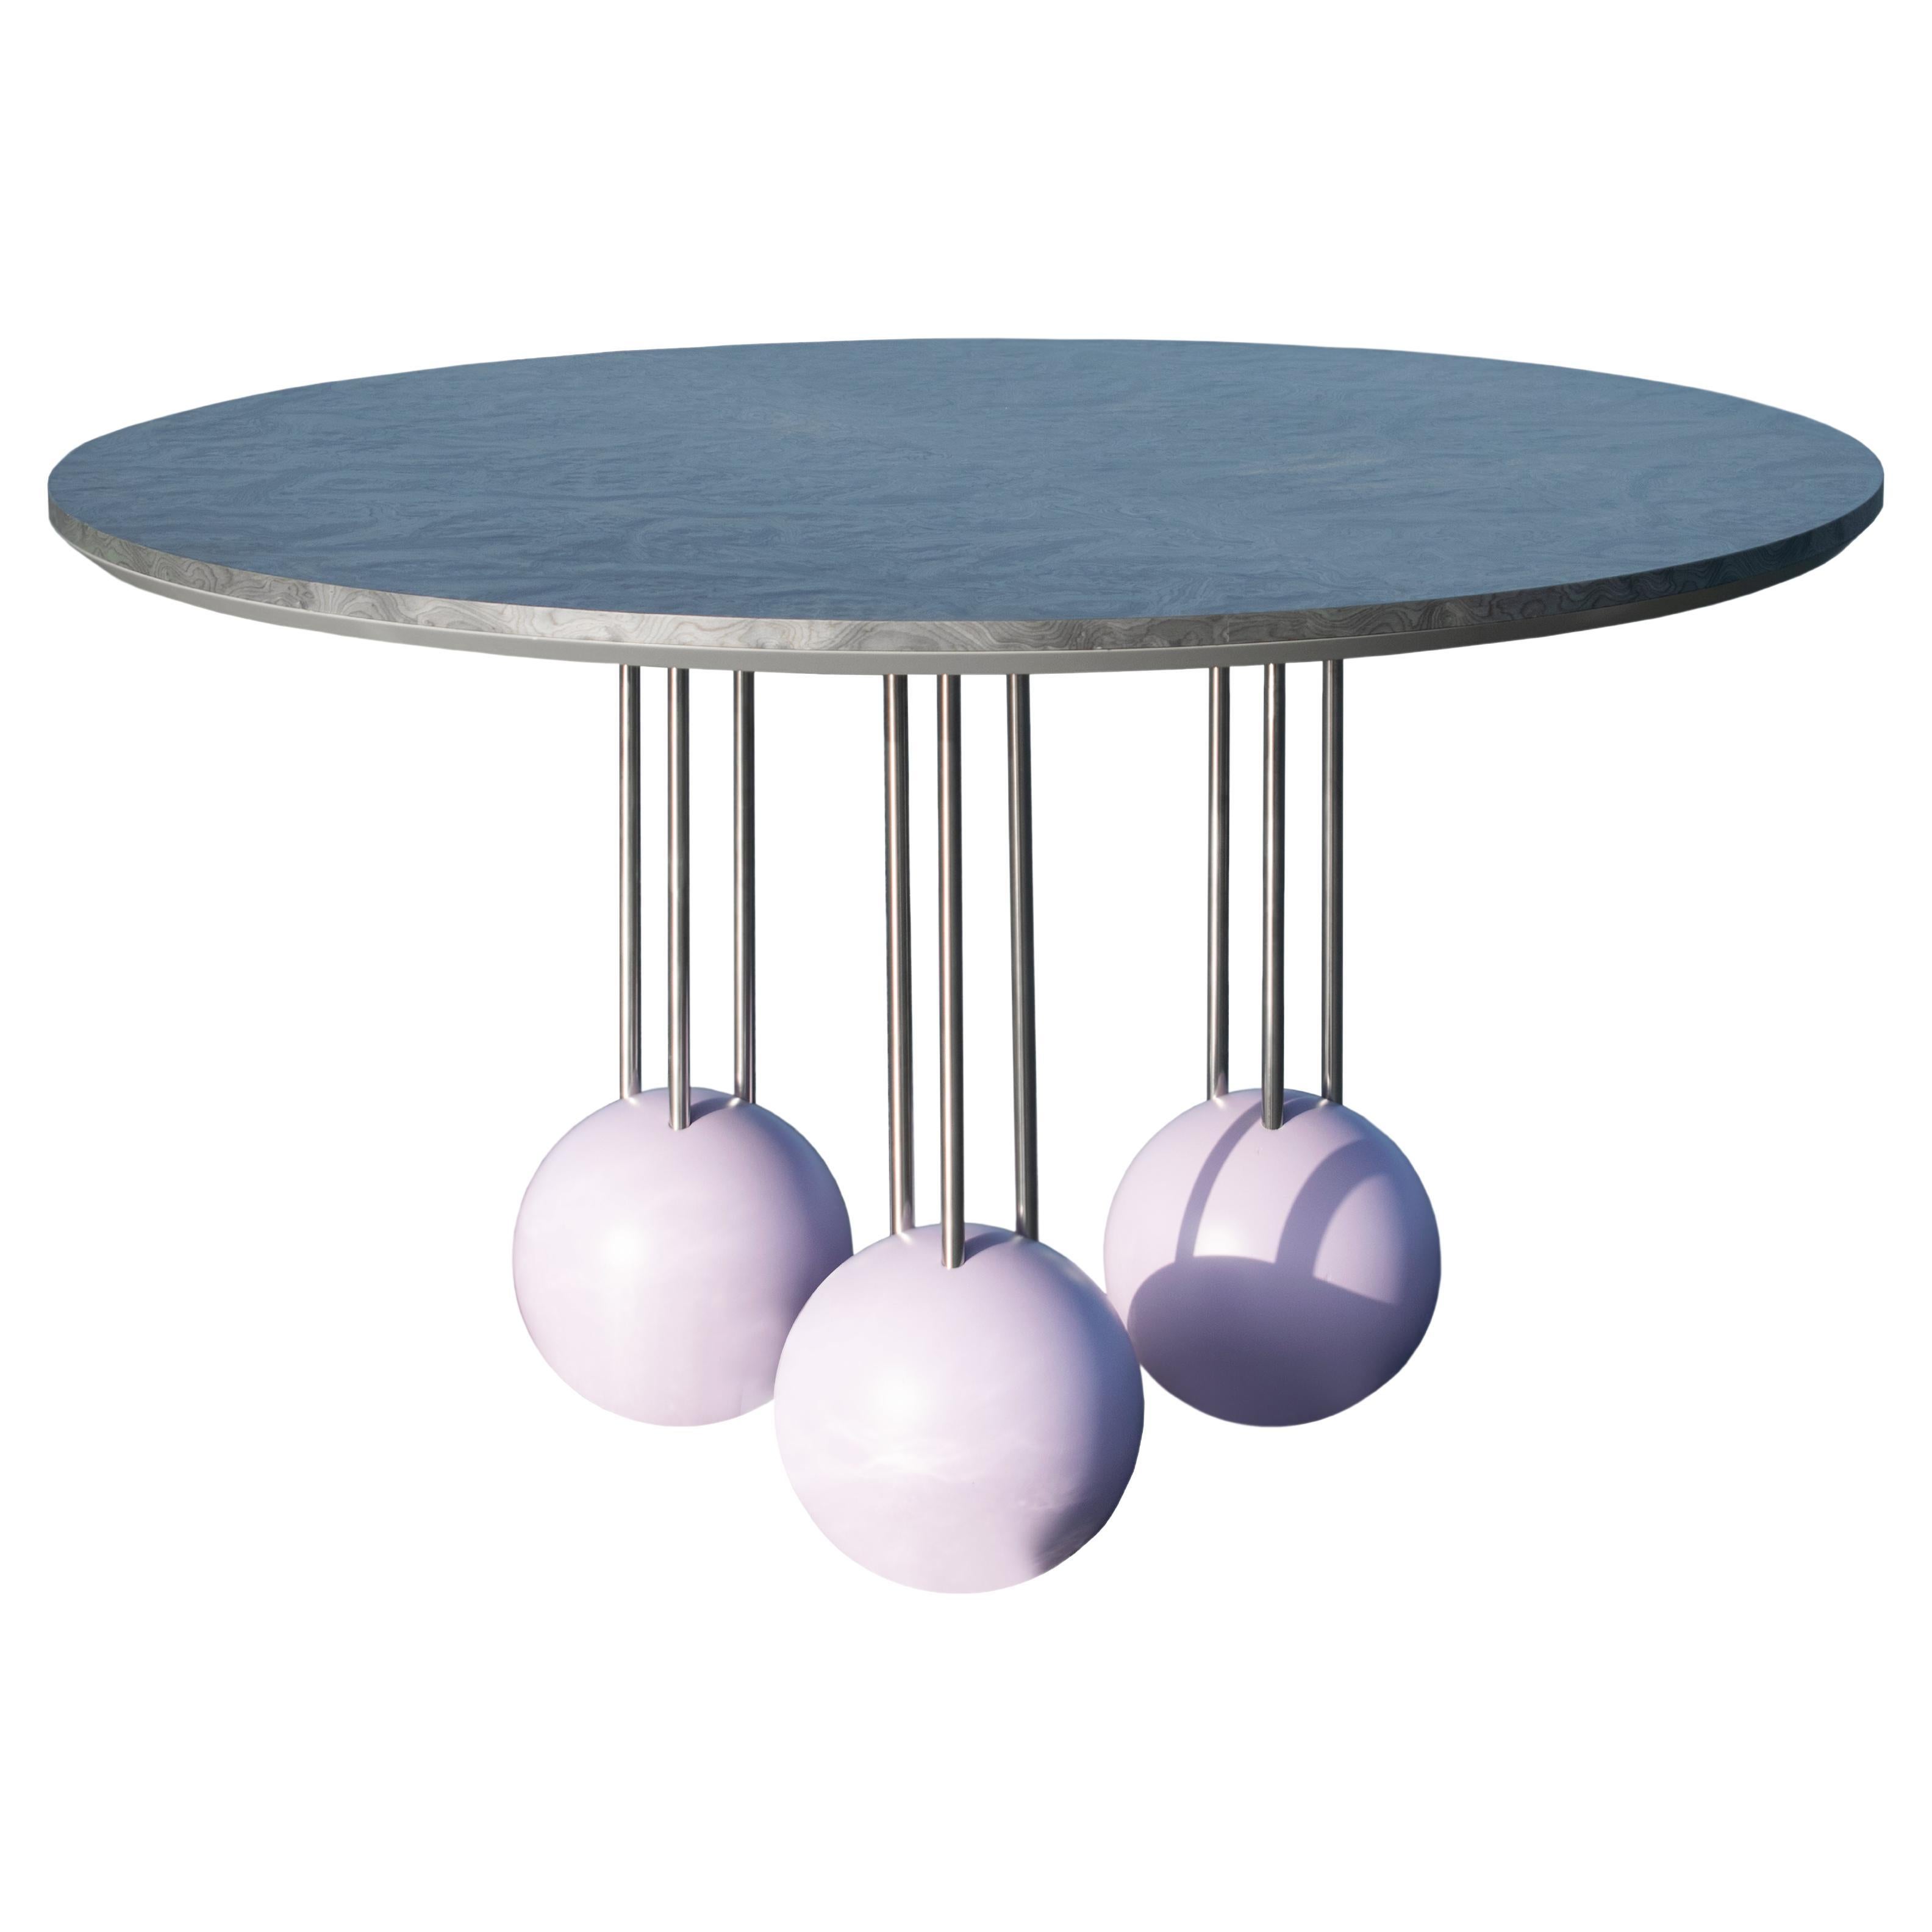 SEA SURFACE Dinning Table in Silver Veneer, Stainless Steel Pipes, Lilac Spheres